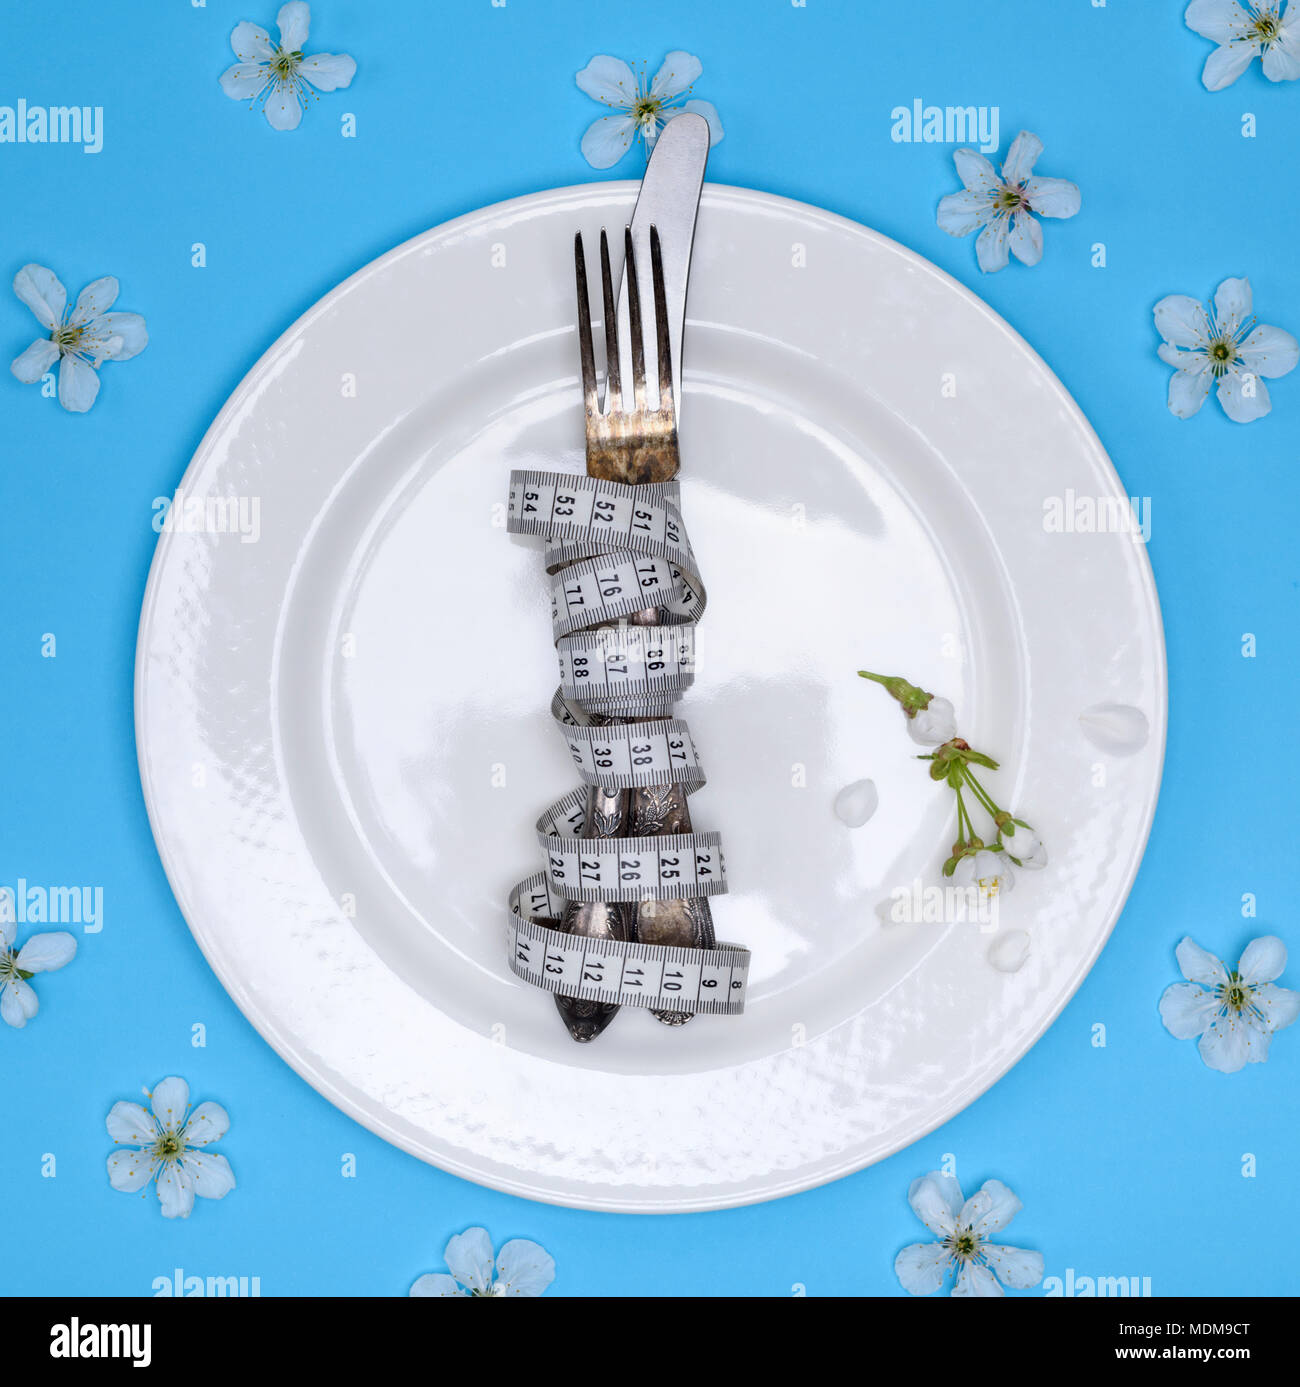 a fork with a knife wrapped in a measuring tape lie on a white round ceramic plate, a blue background strewn with white cherry blossoms, a top view Stock Photo